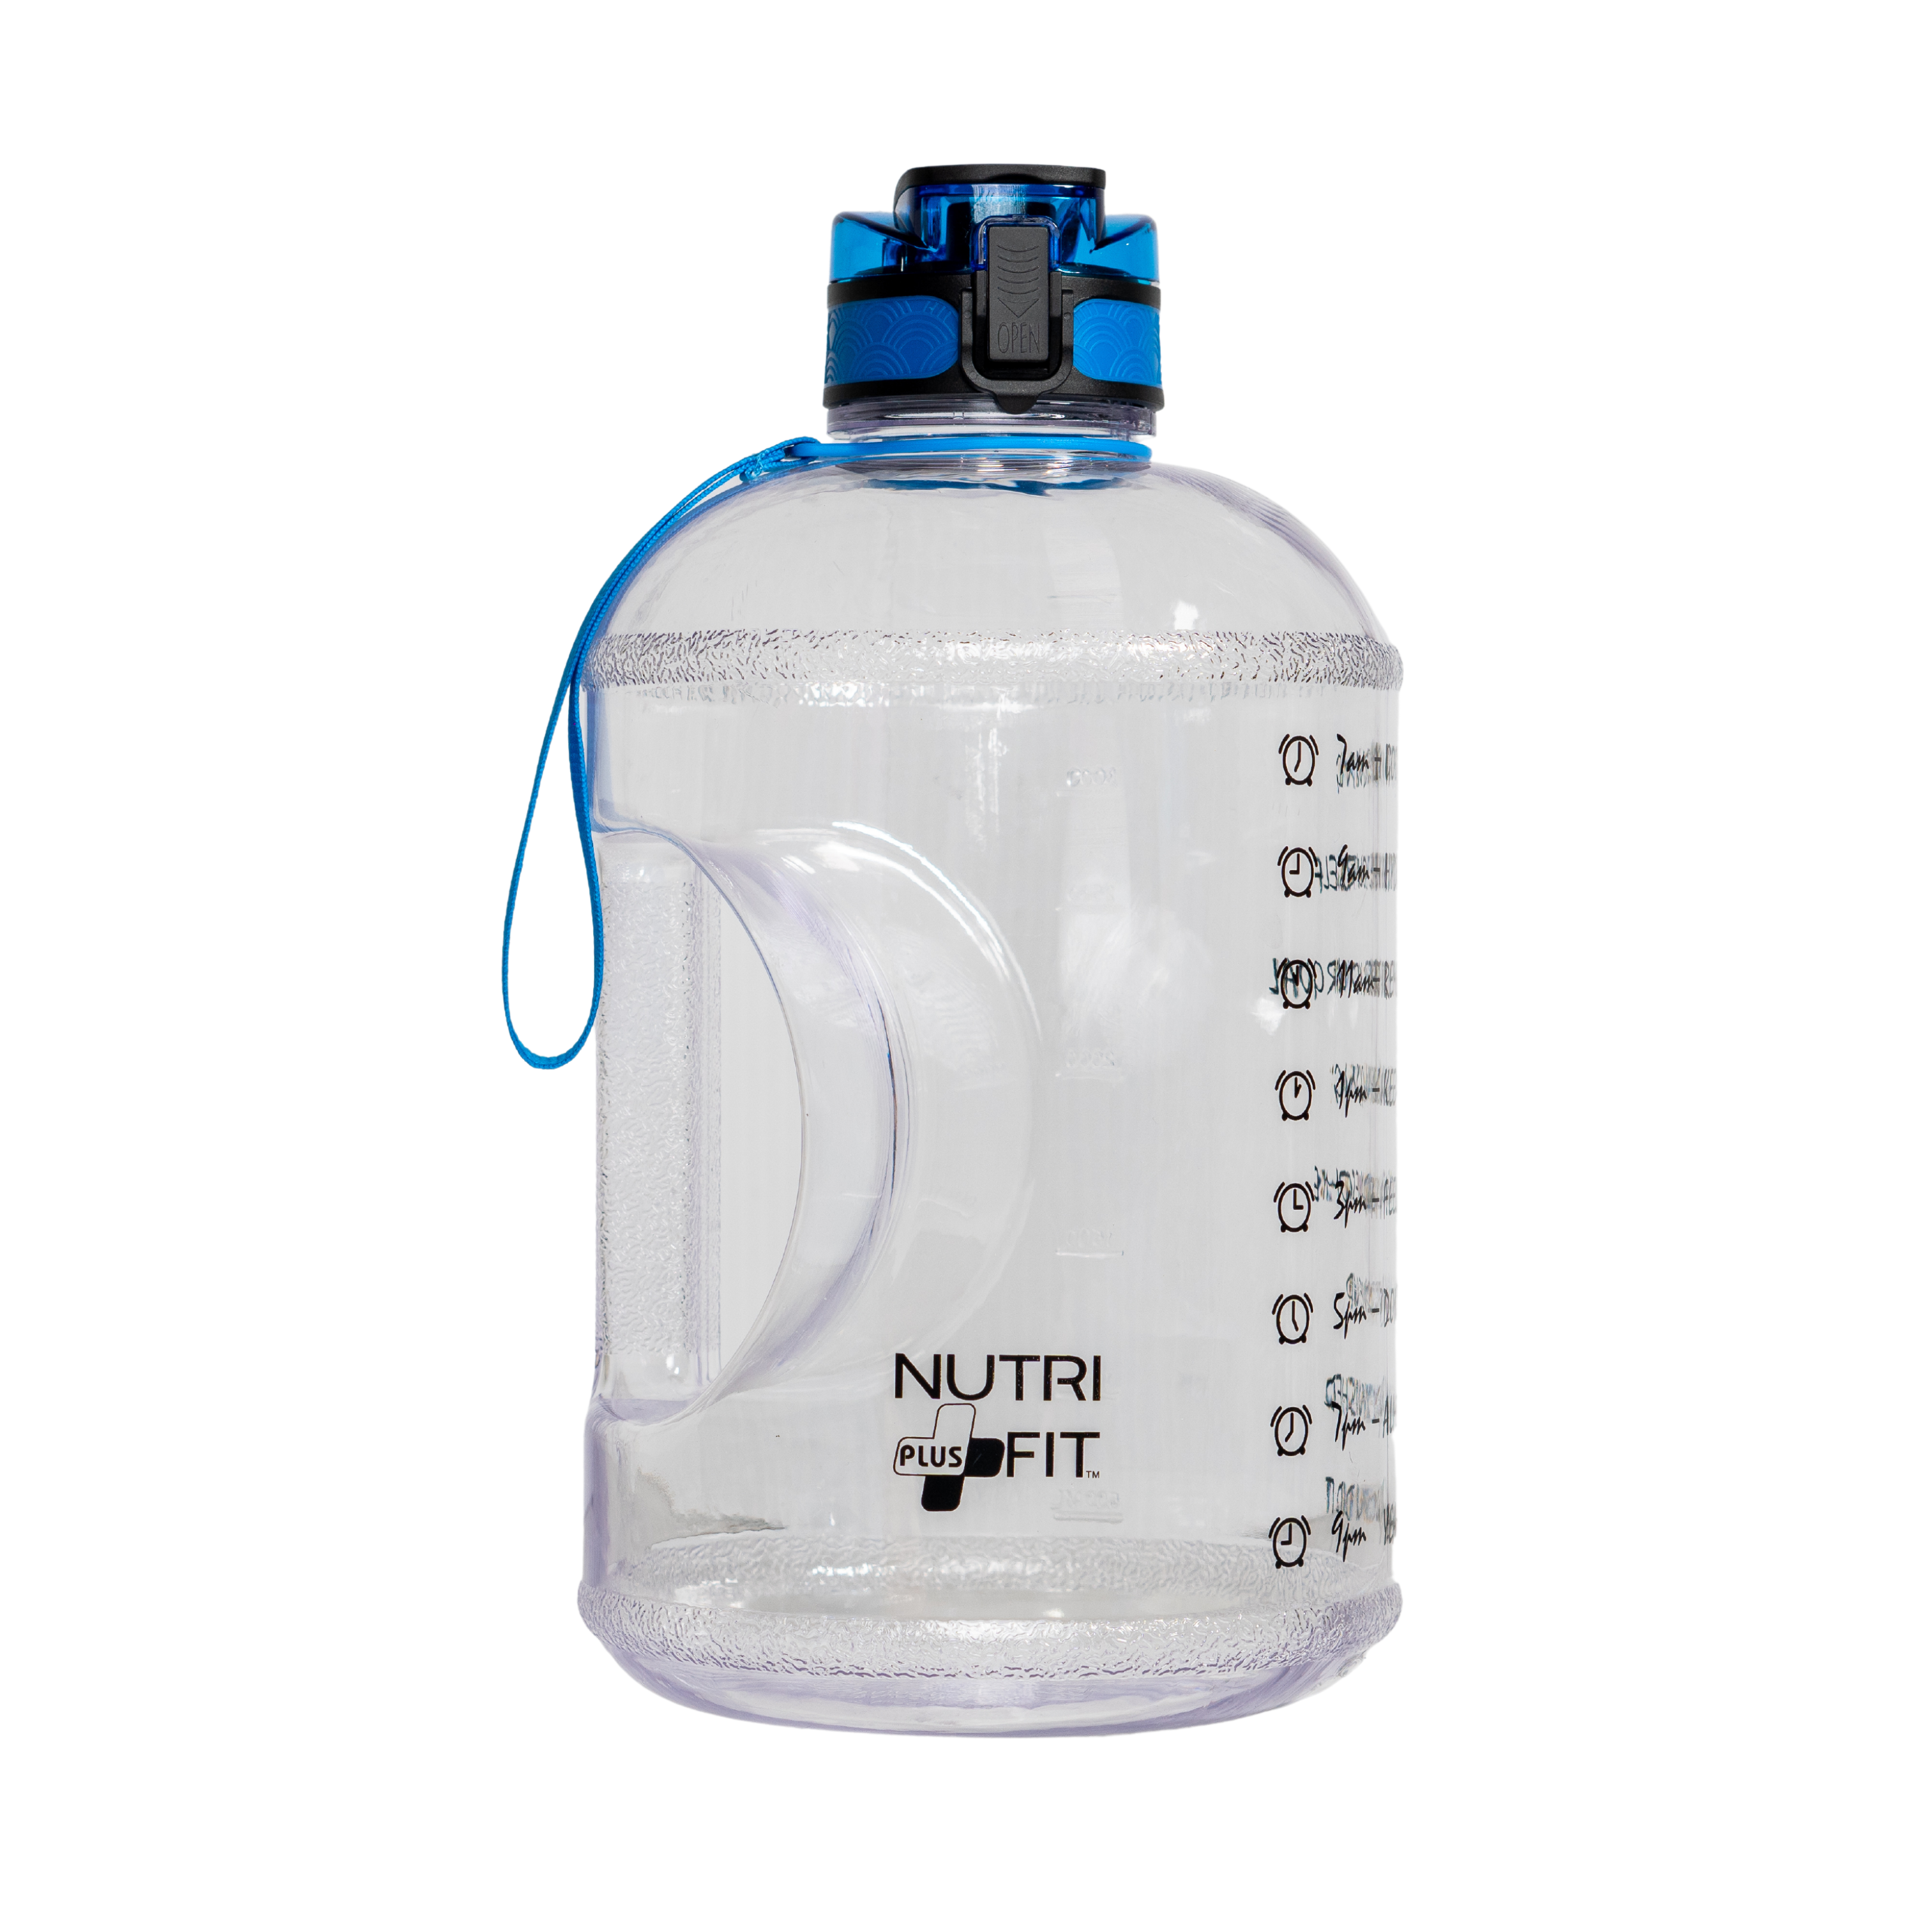 Motivational Water Gallon 128oz for Ultimate Hydration with leak-proof lid and Easy to carry handle BPA Free